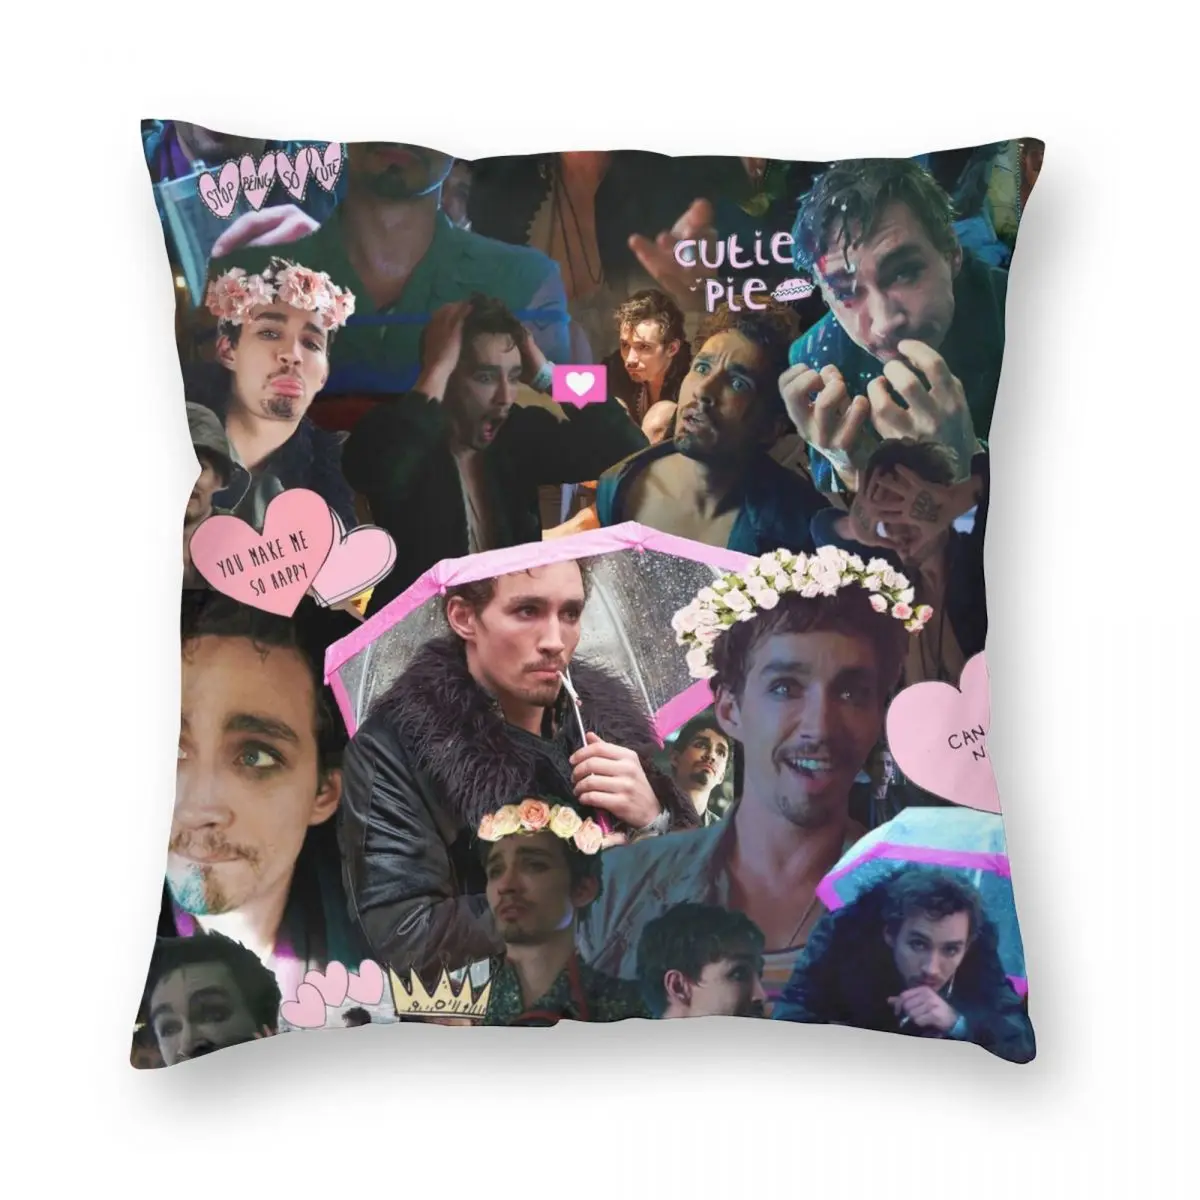 

Klaus Hargreeves Collage Umbrella Academy Pillowcase Soft Polyester Cushion Cover Decoration Throw Pillow Case Cover Home 45*45